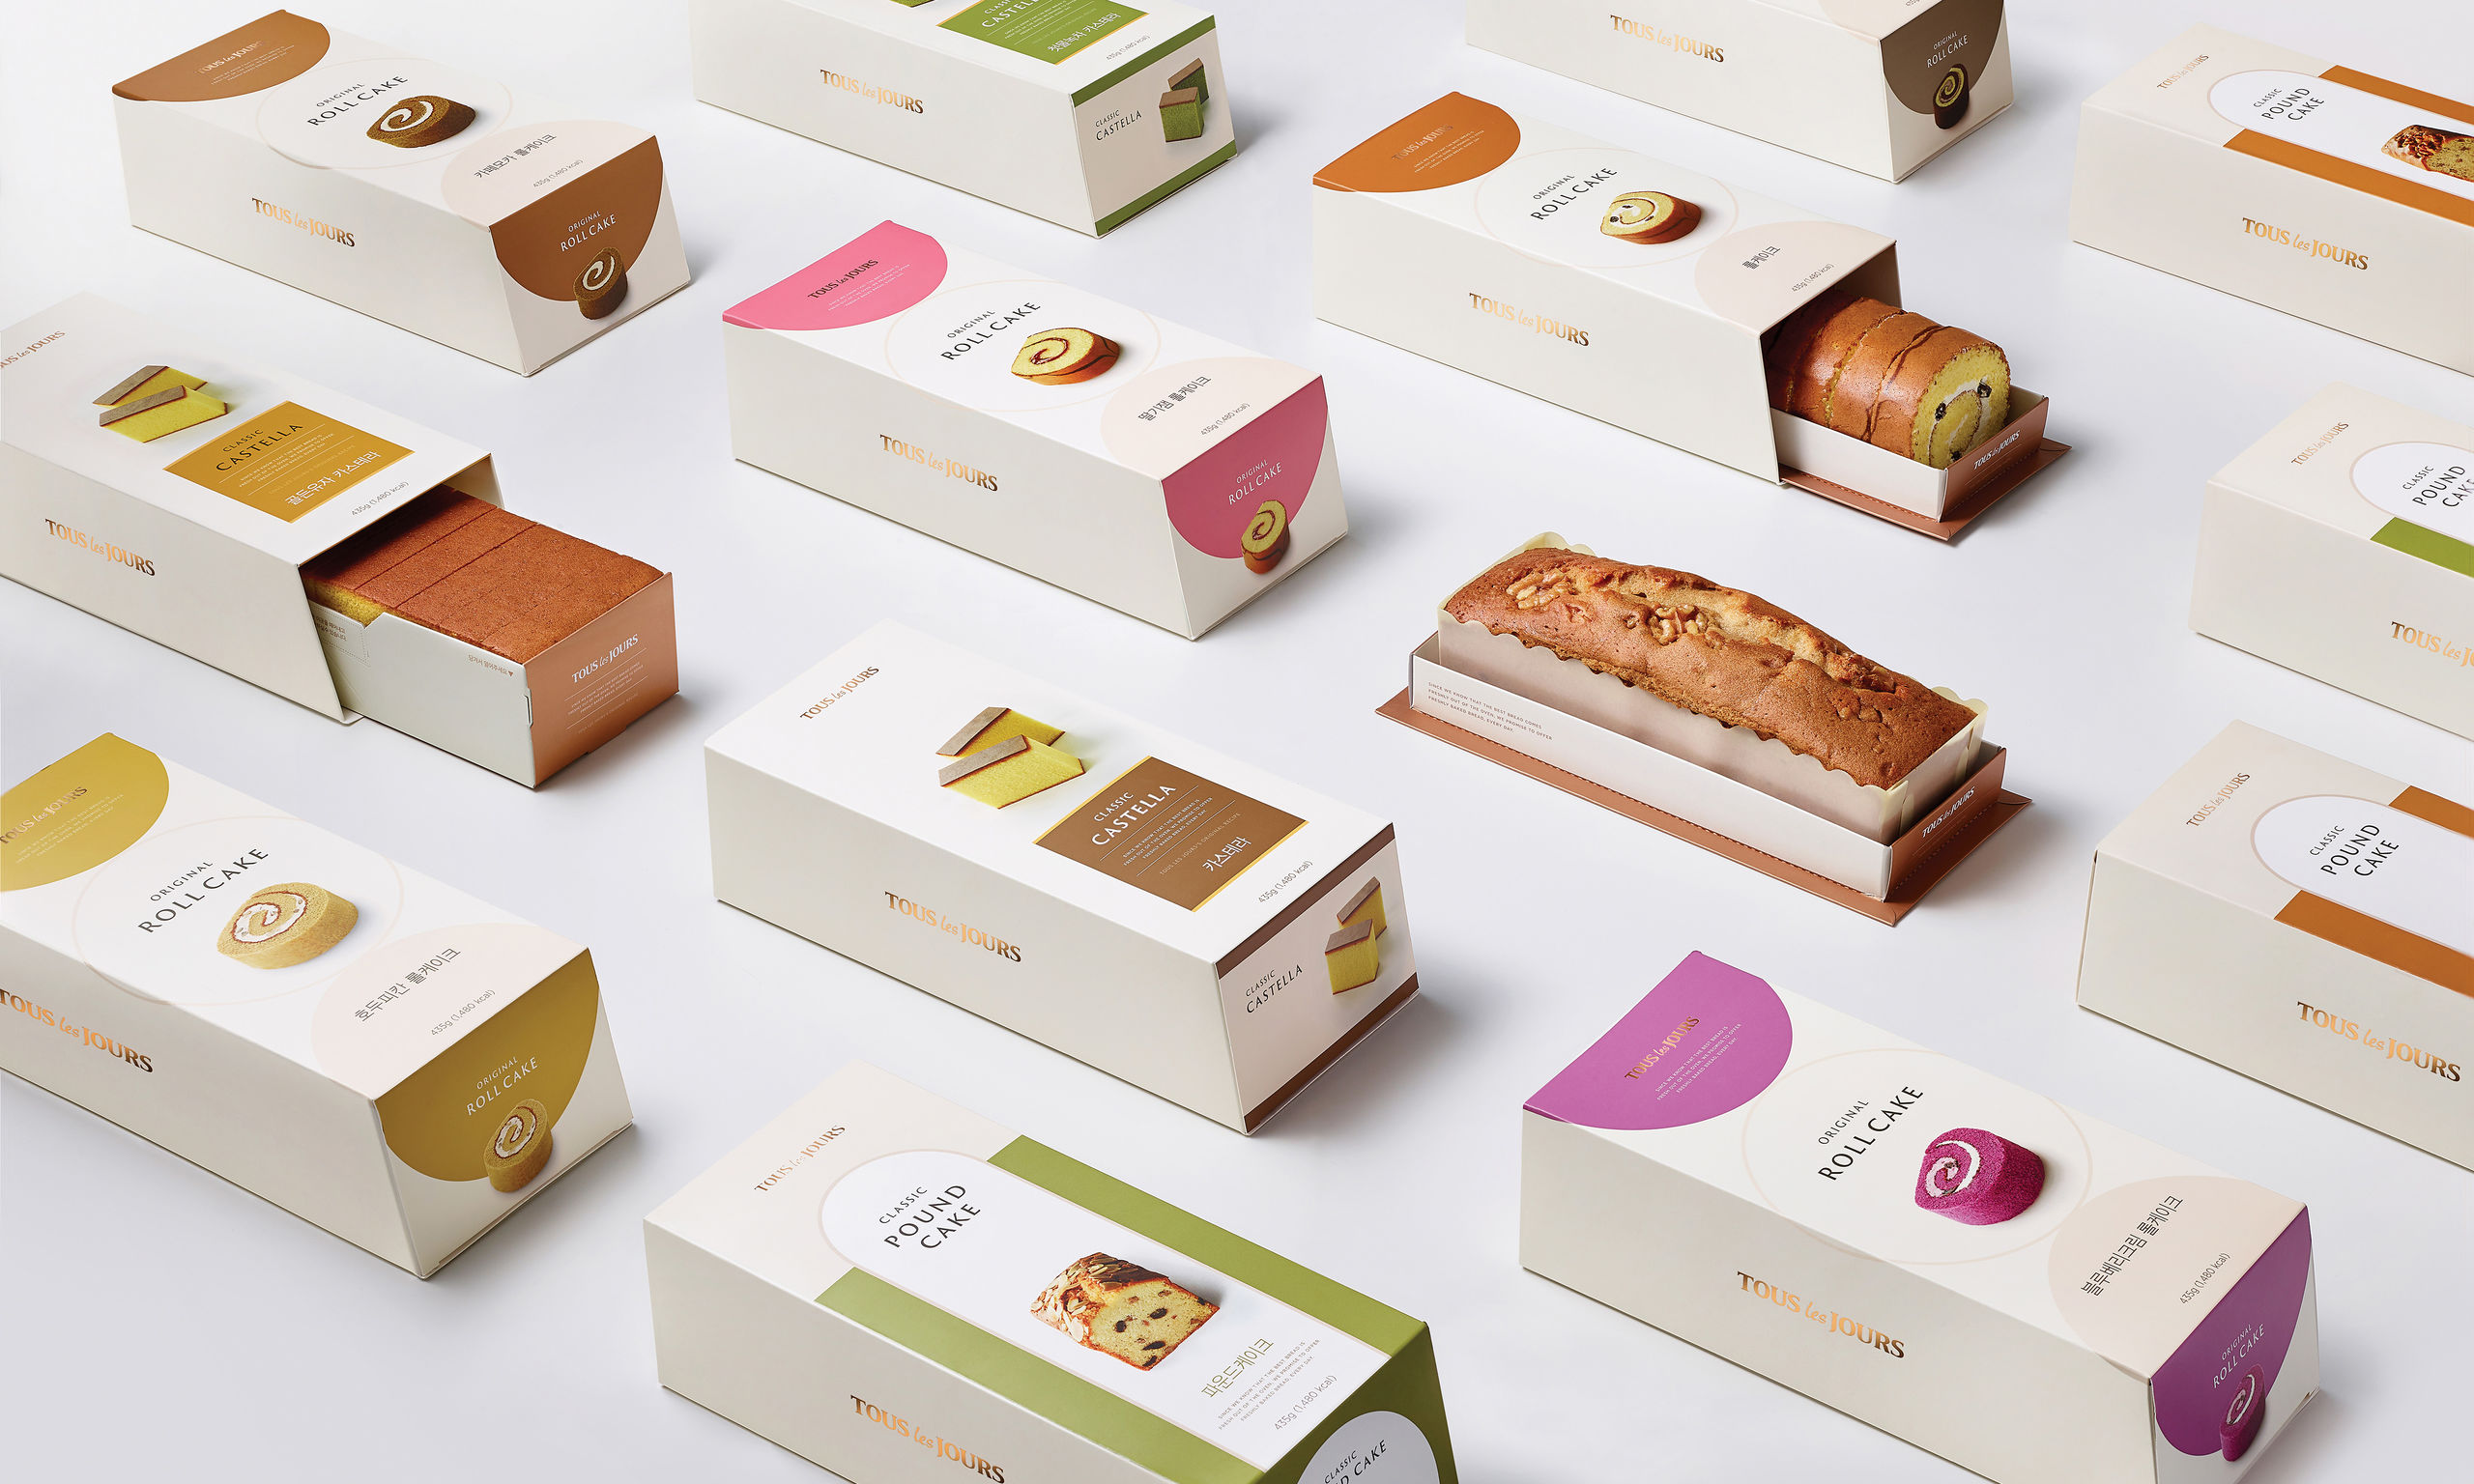 TOUS les JOURS's The Gourmet Cake Package